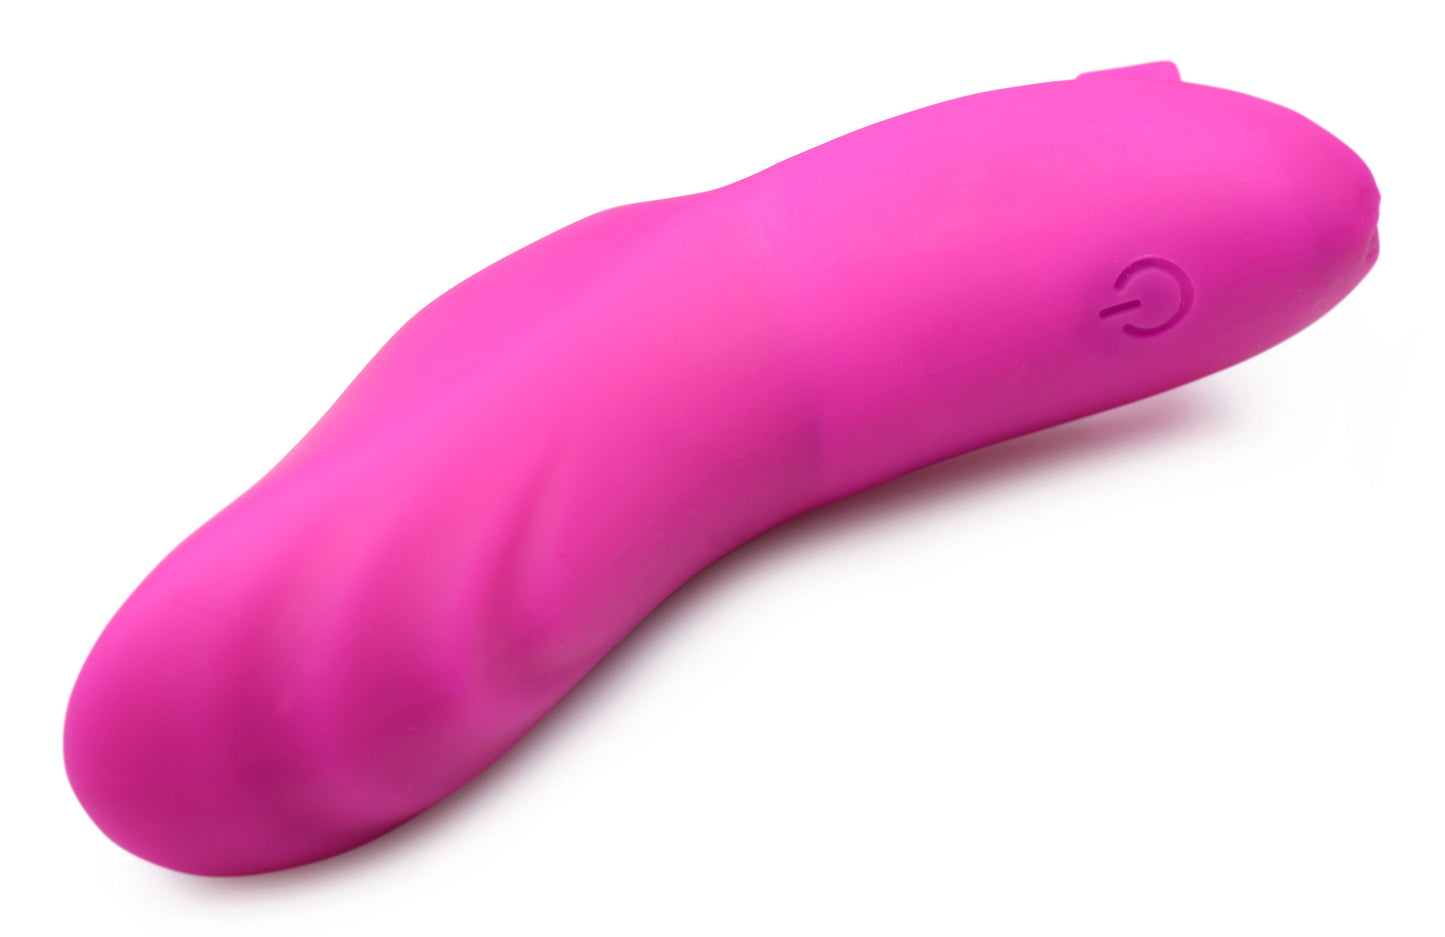 7x Finger Bang Her Pro Silicone Vibrator - Pink